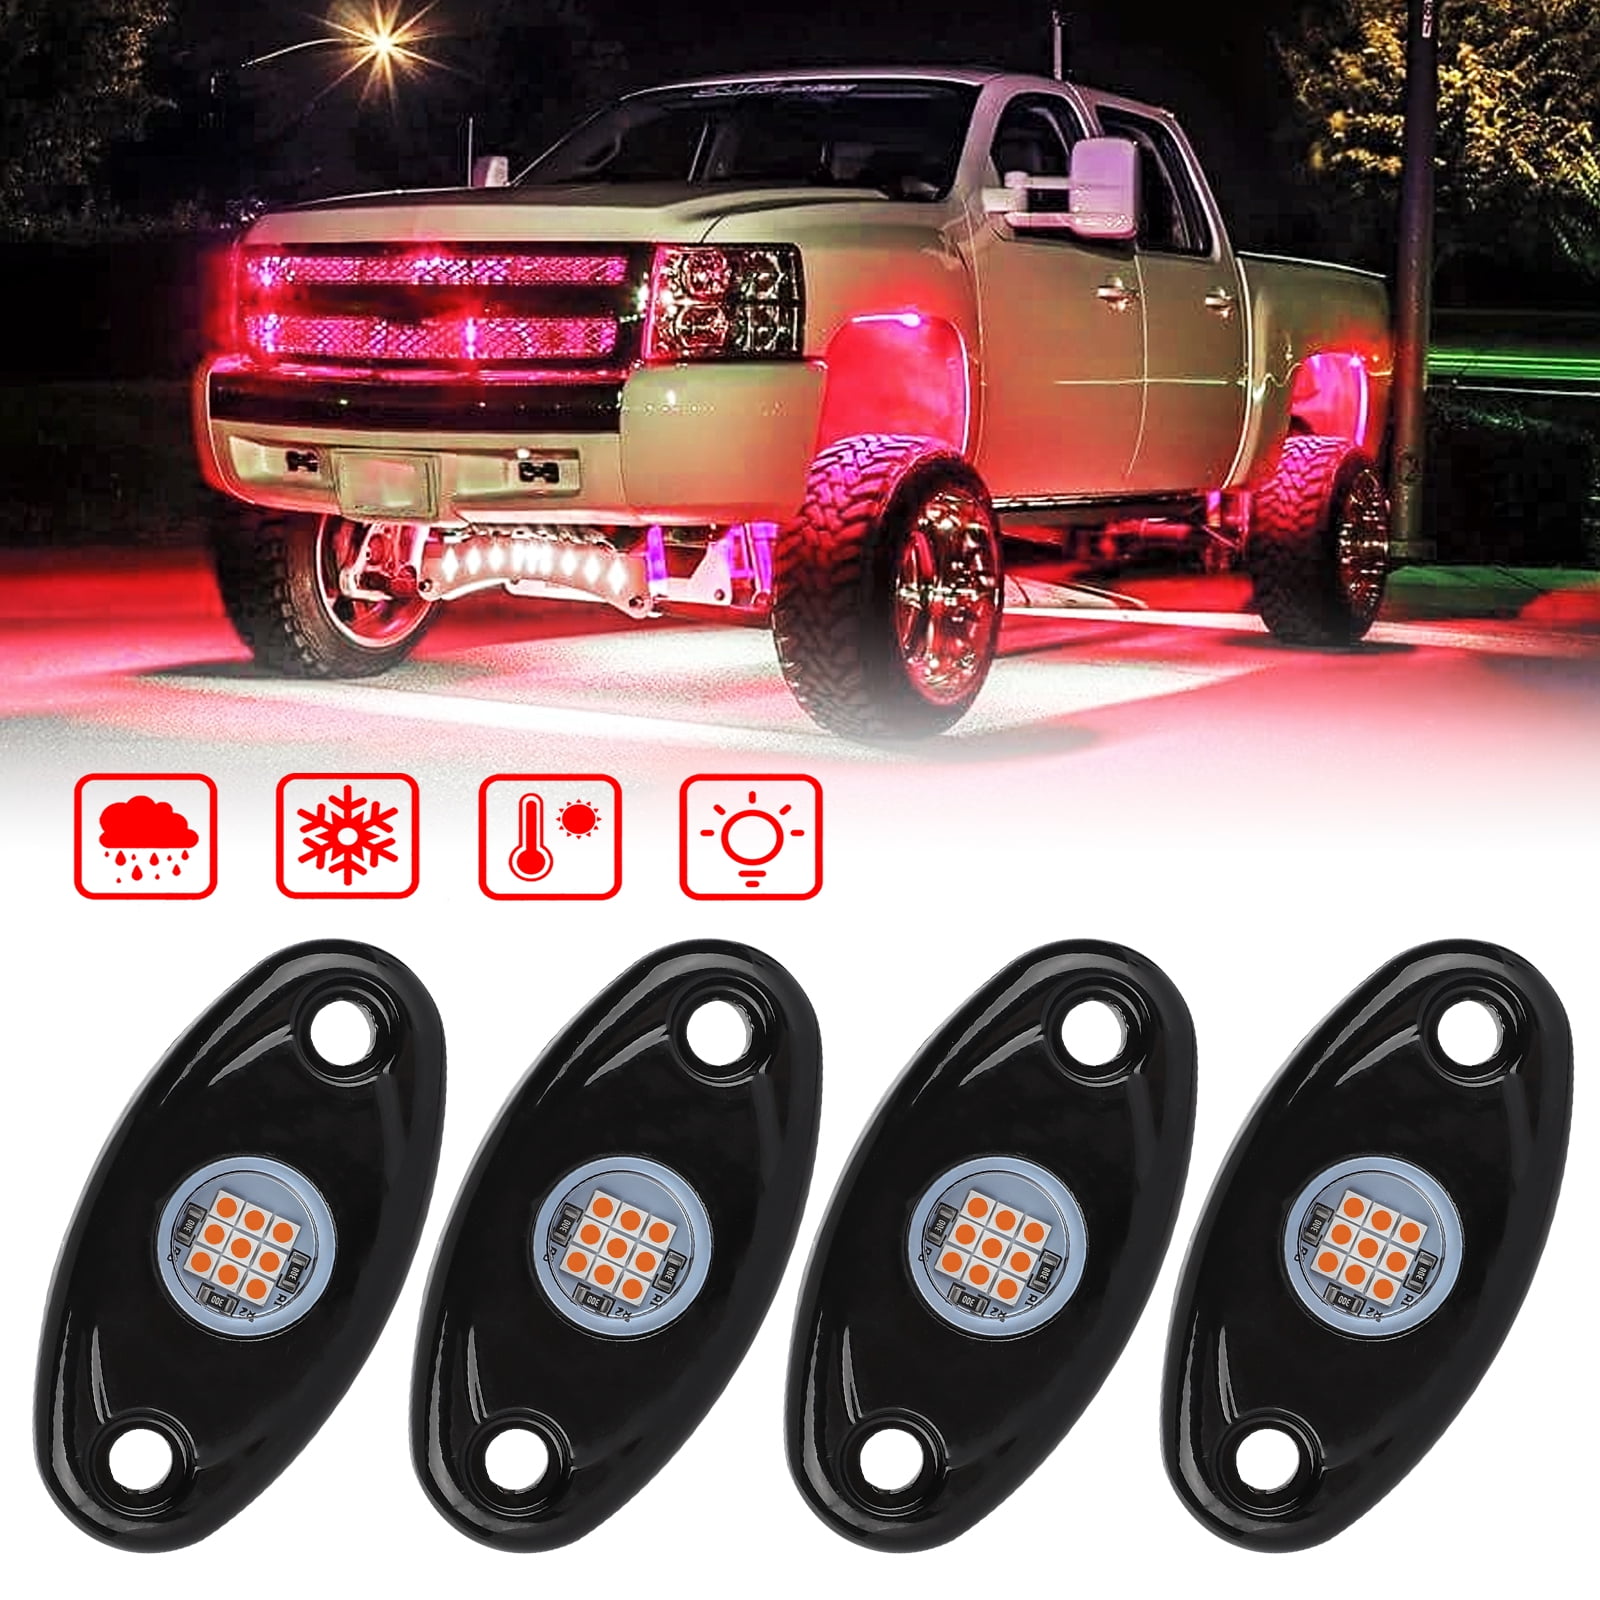 4 Pods LED Rock Light Kit for Jeep ATV SUV Offroad Car Truck Boat Underbody Glow Trail Rig Lamp Underglow LED Neon Lights Waterproof 12V 24V White 